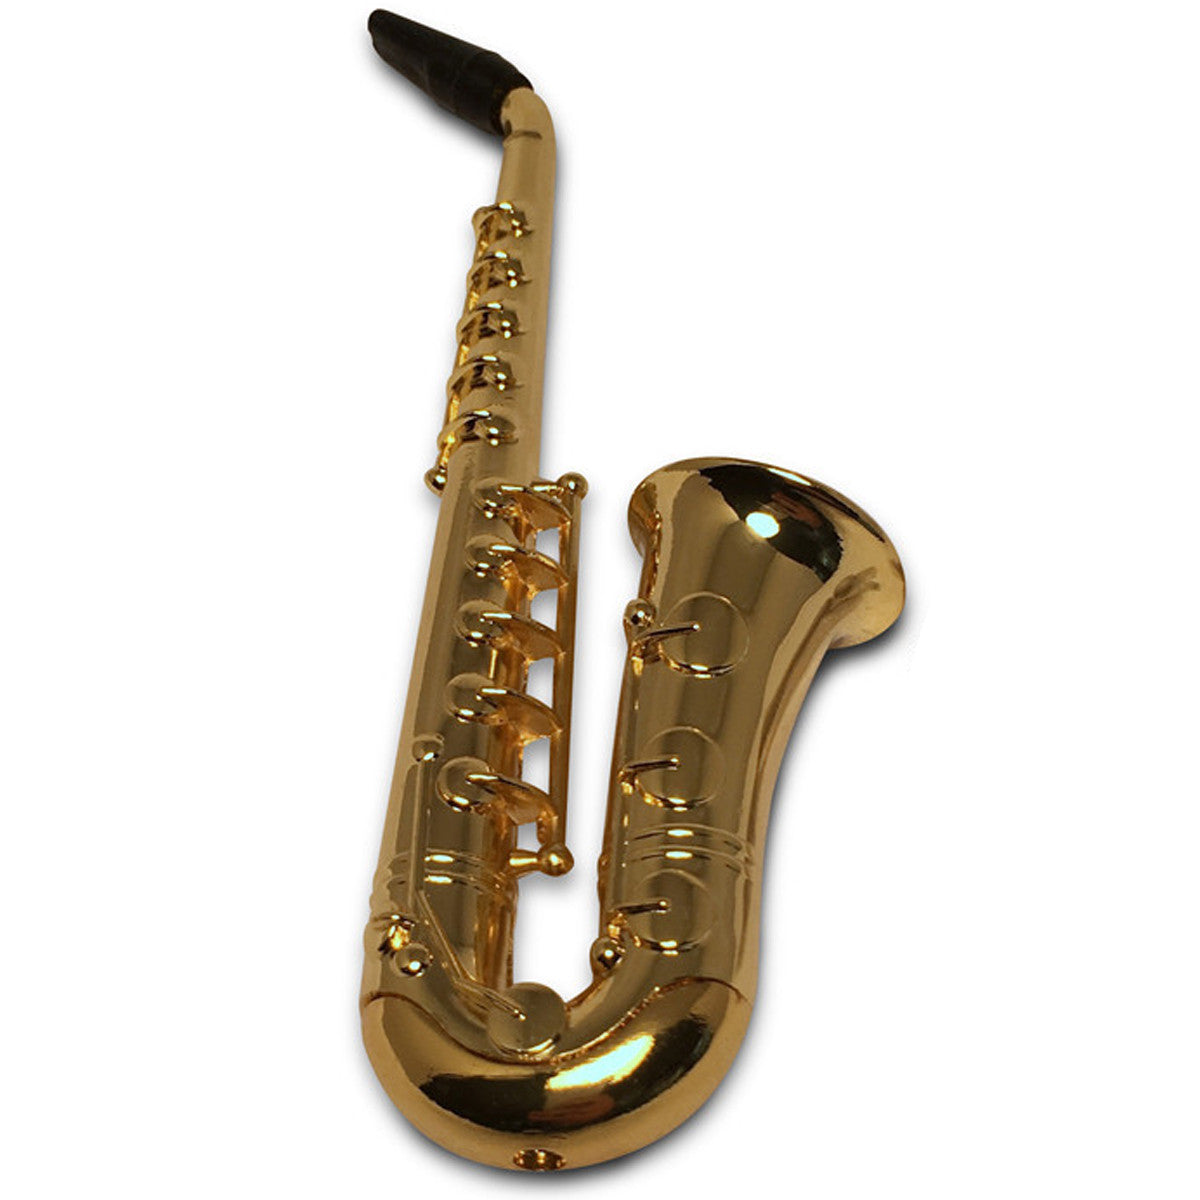 Deluxe Saxophone Pipe - Green Goddess Supply